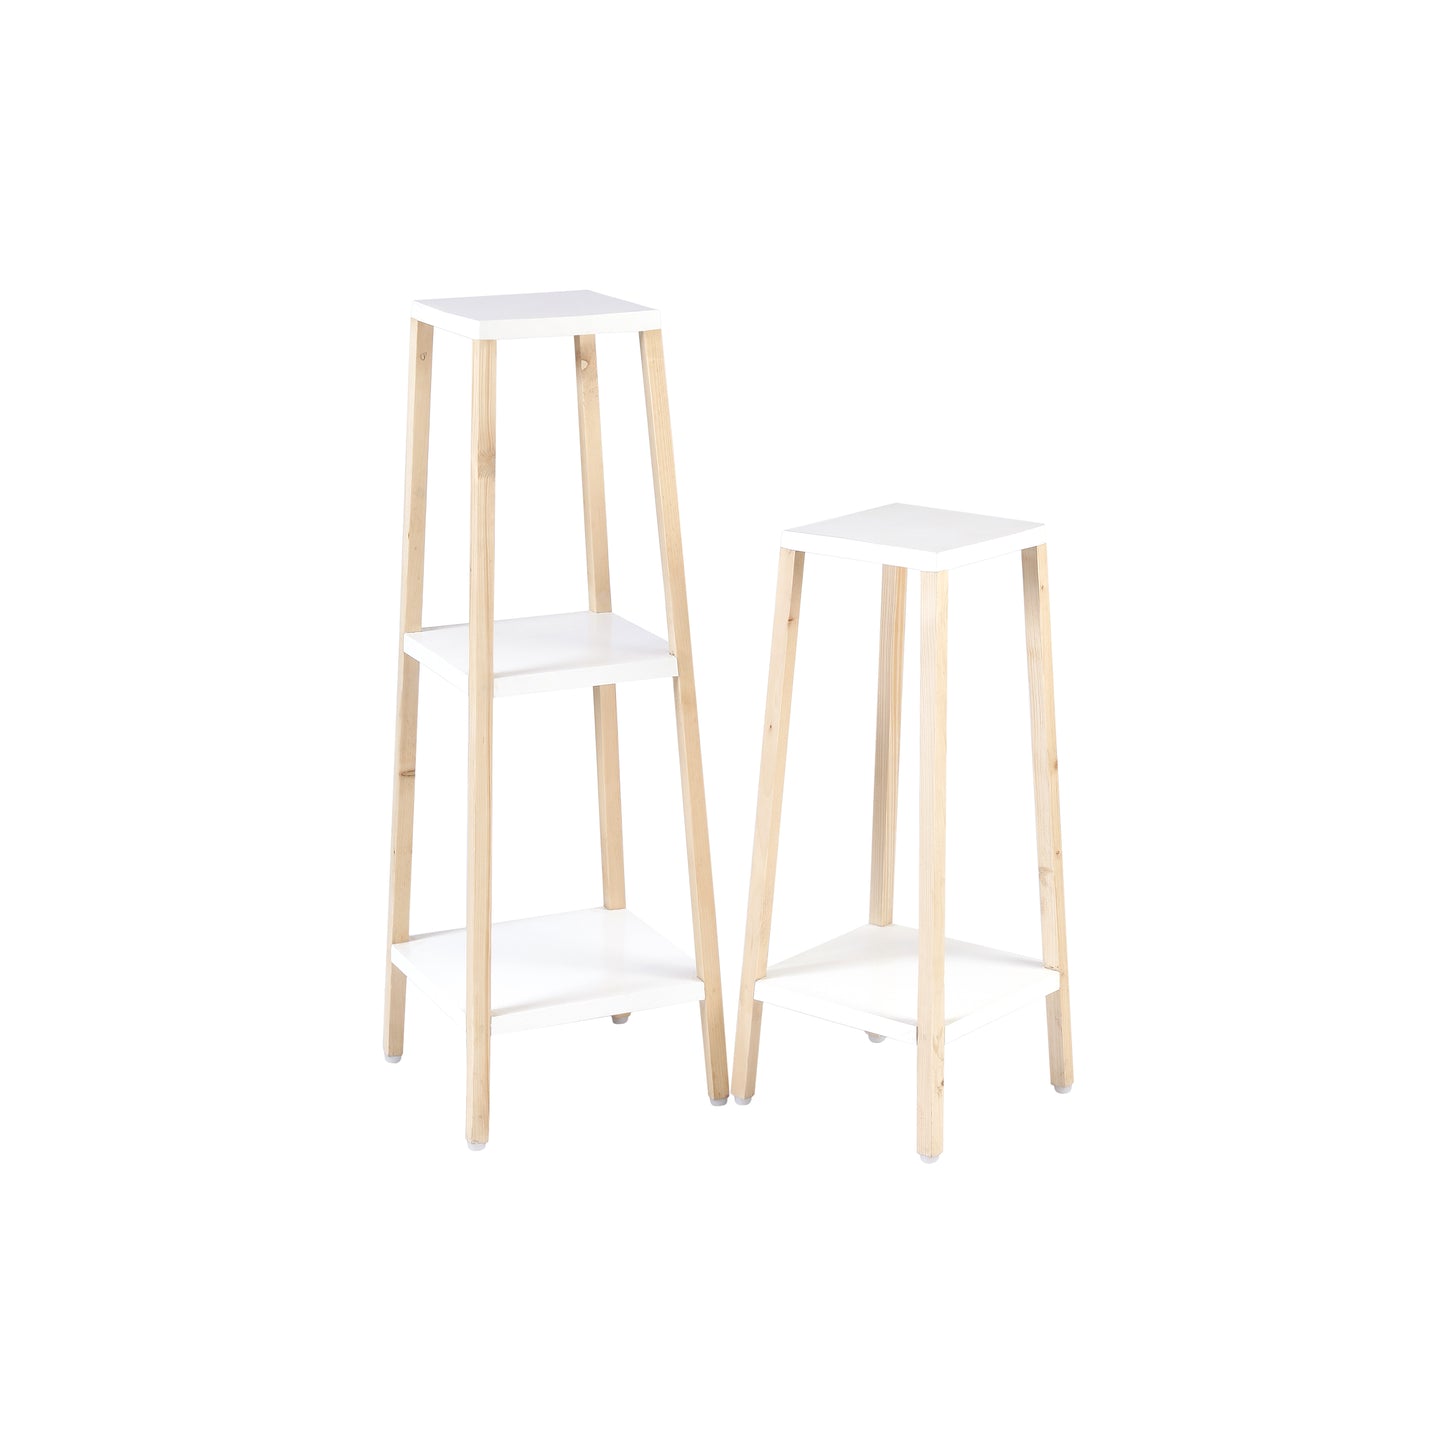 A Tiny Mistake Square Four Legged Tapering Two Tier Decorative Stand (Two Tiers) (White Base with Light Legs)